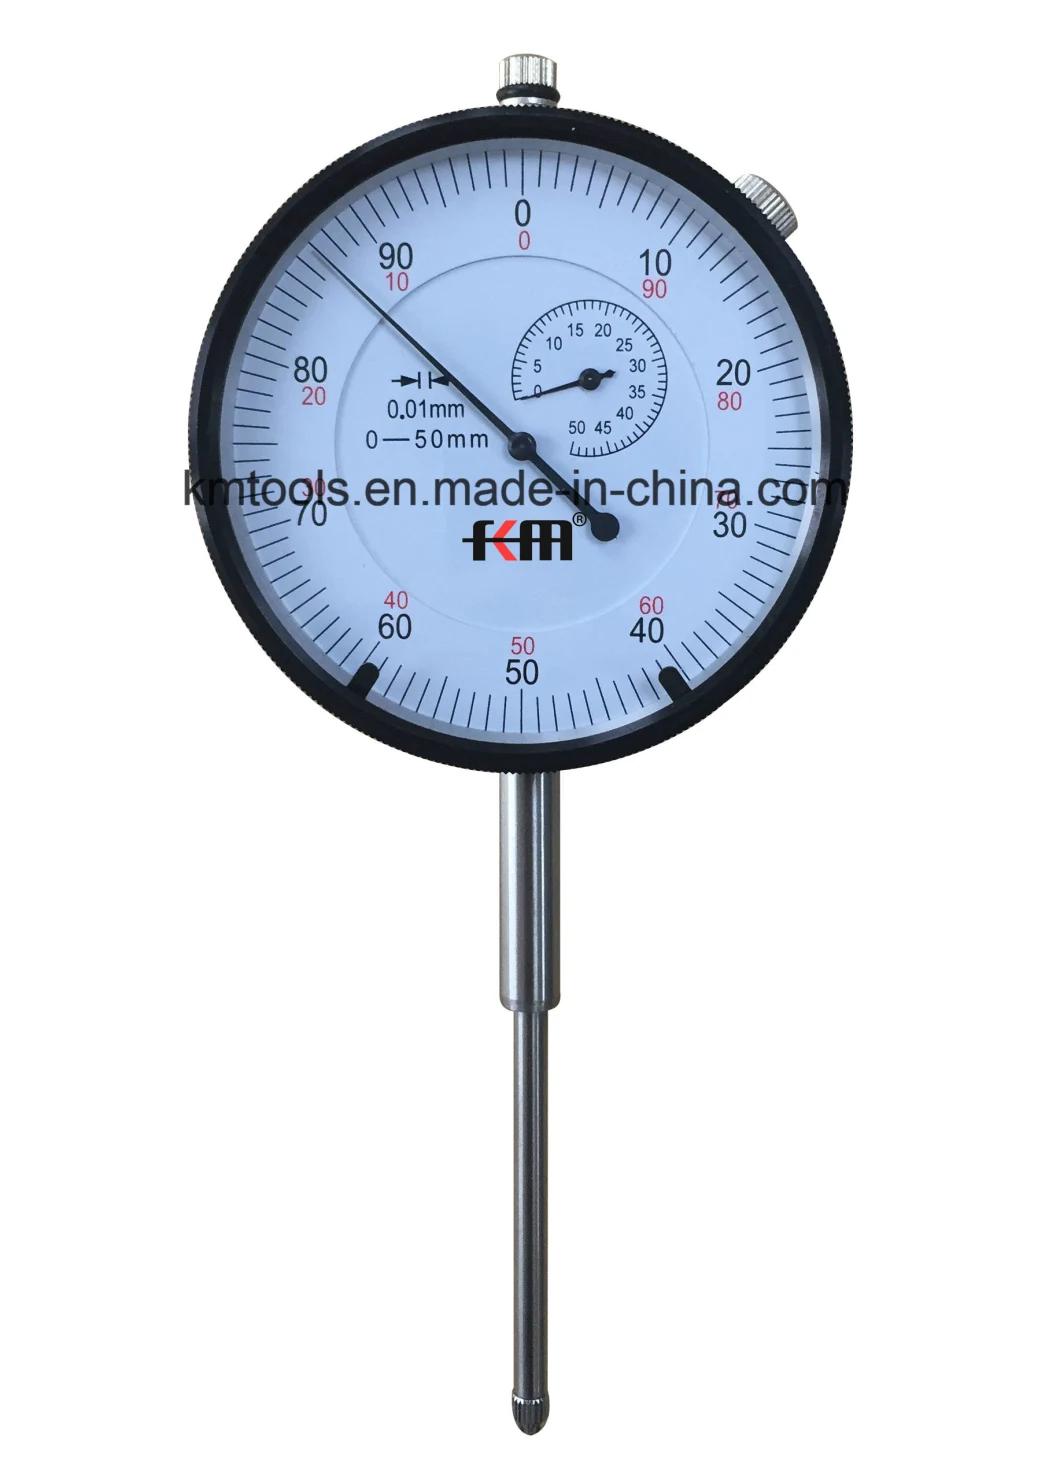 High Quality 0-50mm Mechanical Dial Indicator with 0.01mm Graduation Measuring Device